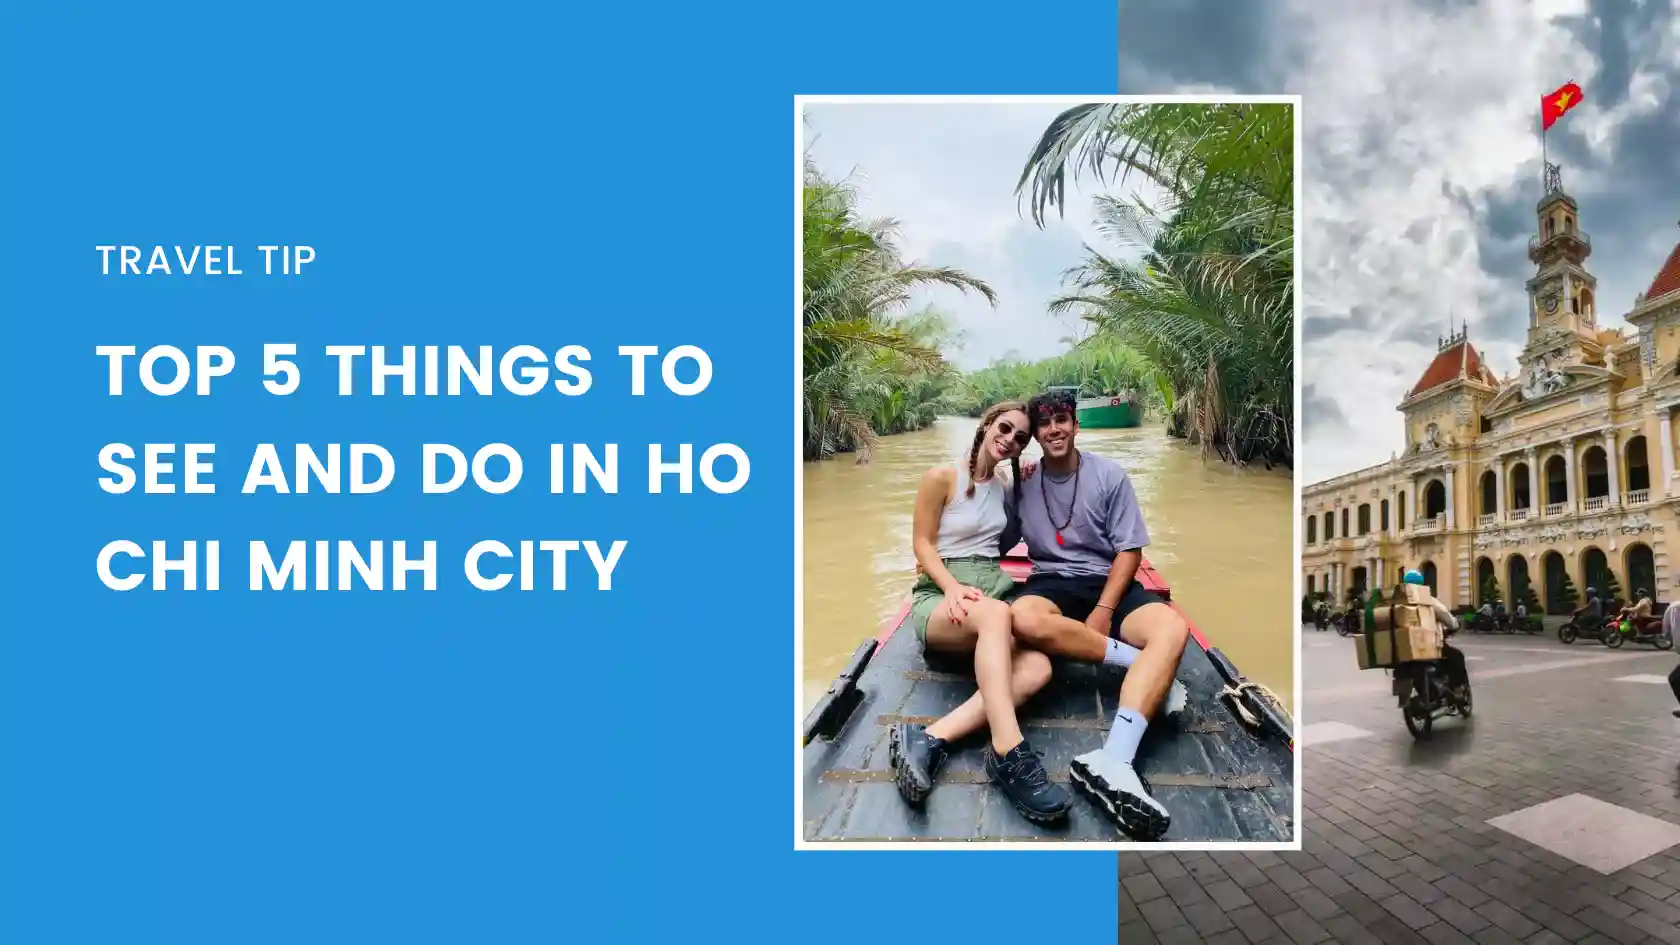 Top 5 Things to See and Do in Ho Chi Minh City